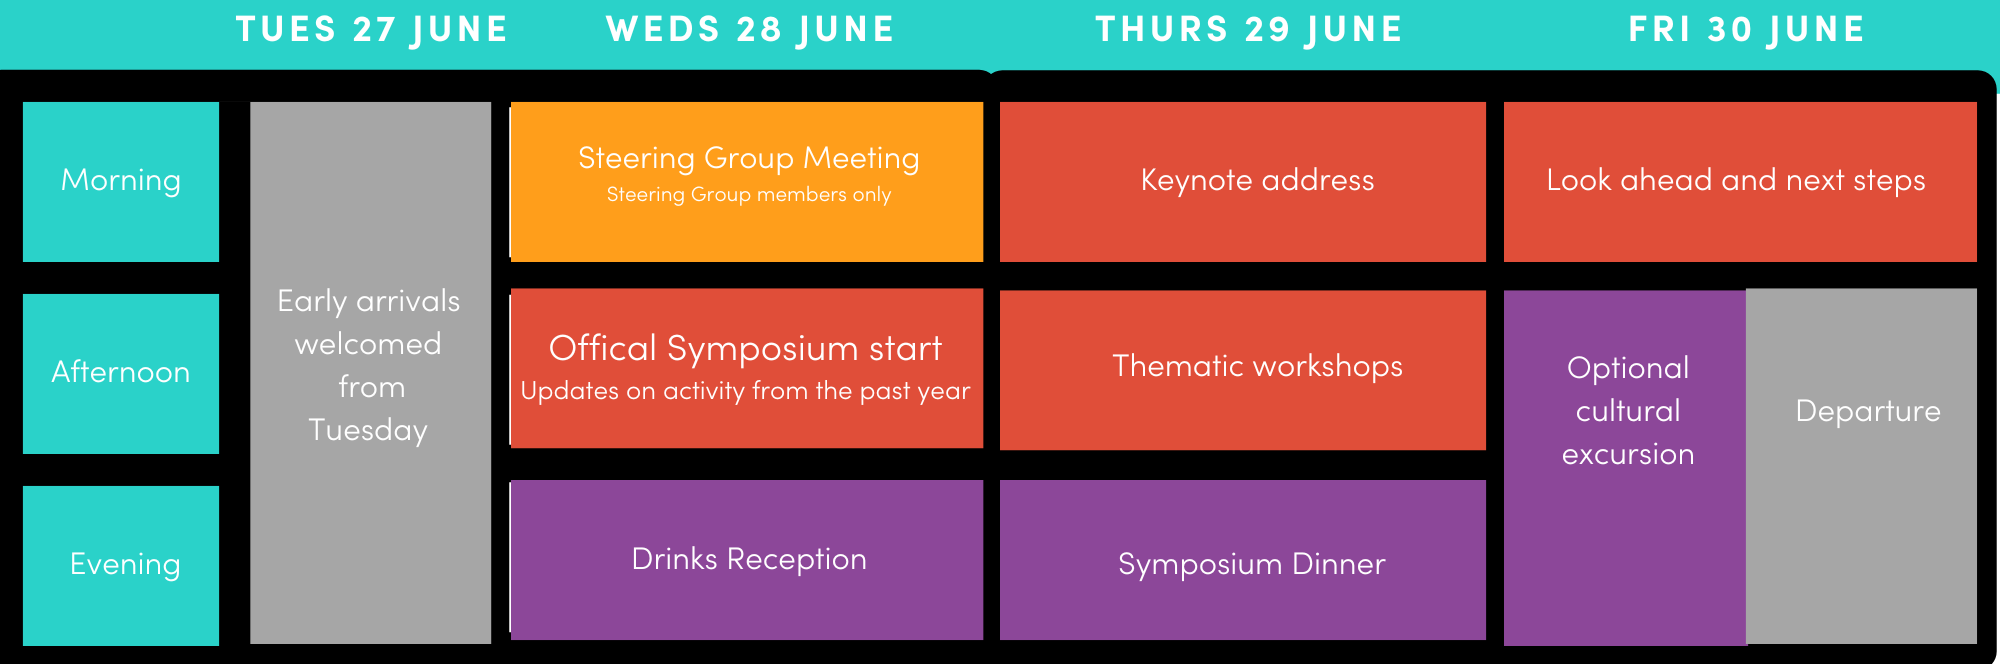 Early arrivals accepted from Tuesday 27 June. Wednesday 28 June Steering Group meeting, Symposium Opening - updates from the year, Drinks receptions, Thursday 29 June keynote address, thematic workshops, symposium dinner, Friday 30 June look ahead and next steps, optional cultural activity, departure